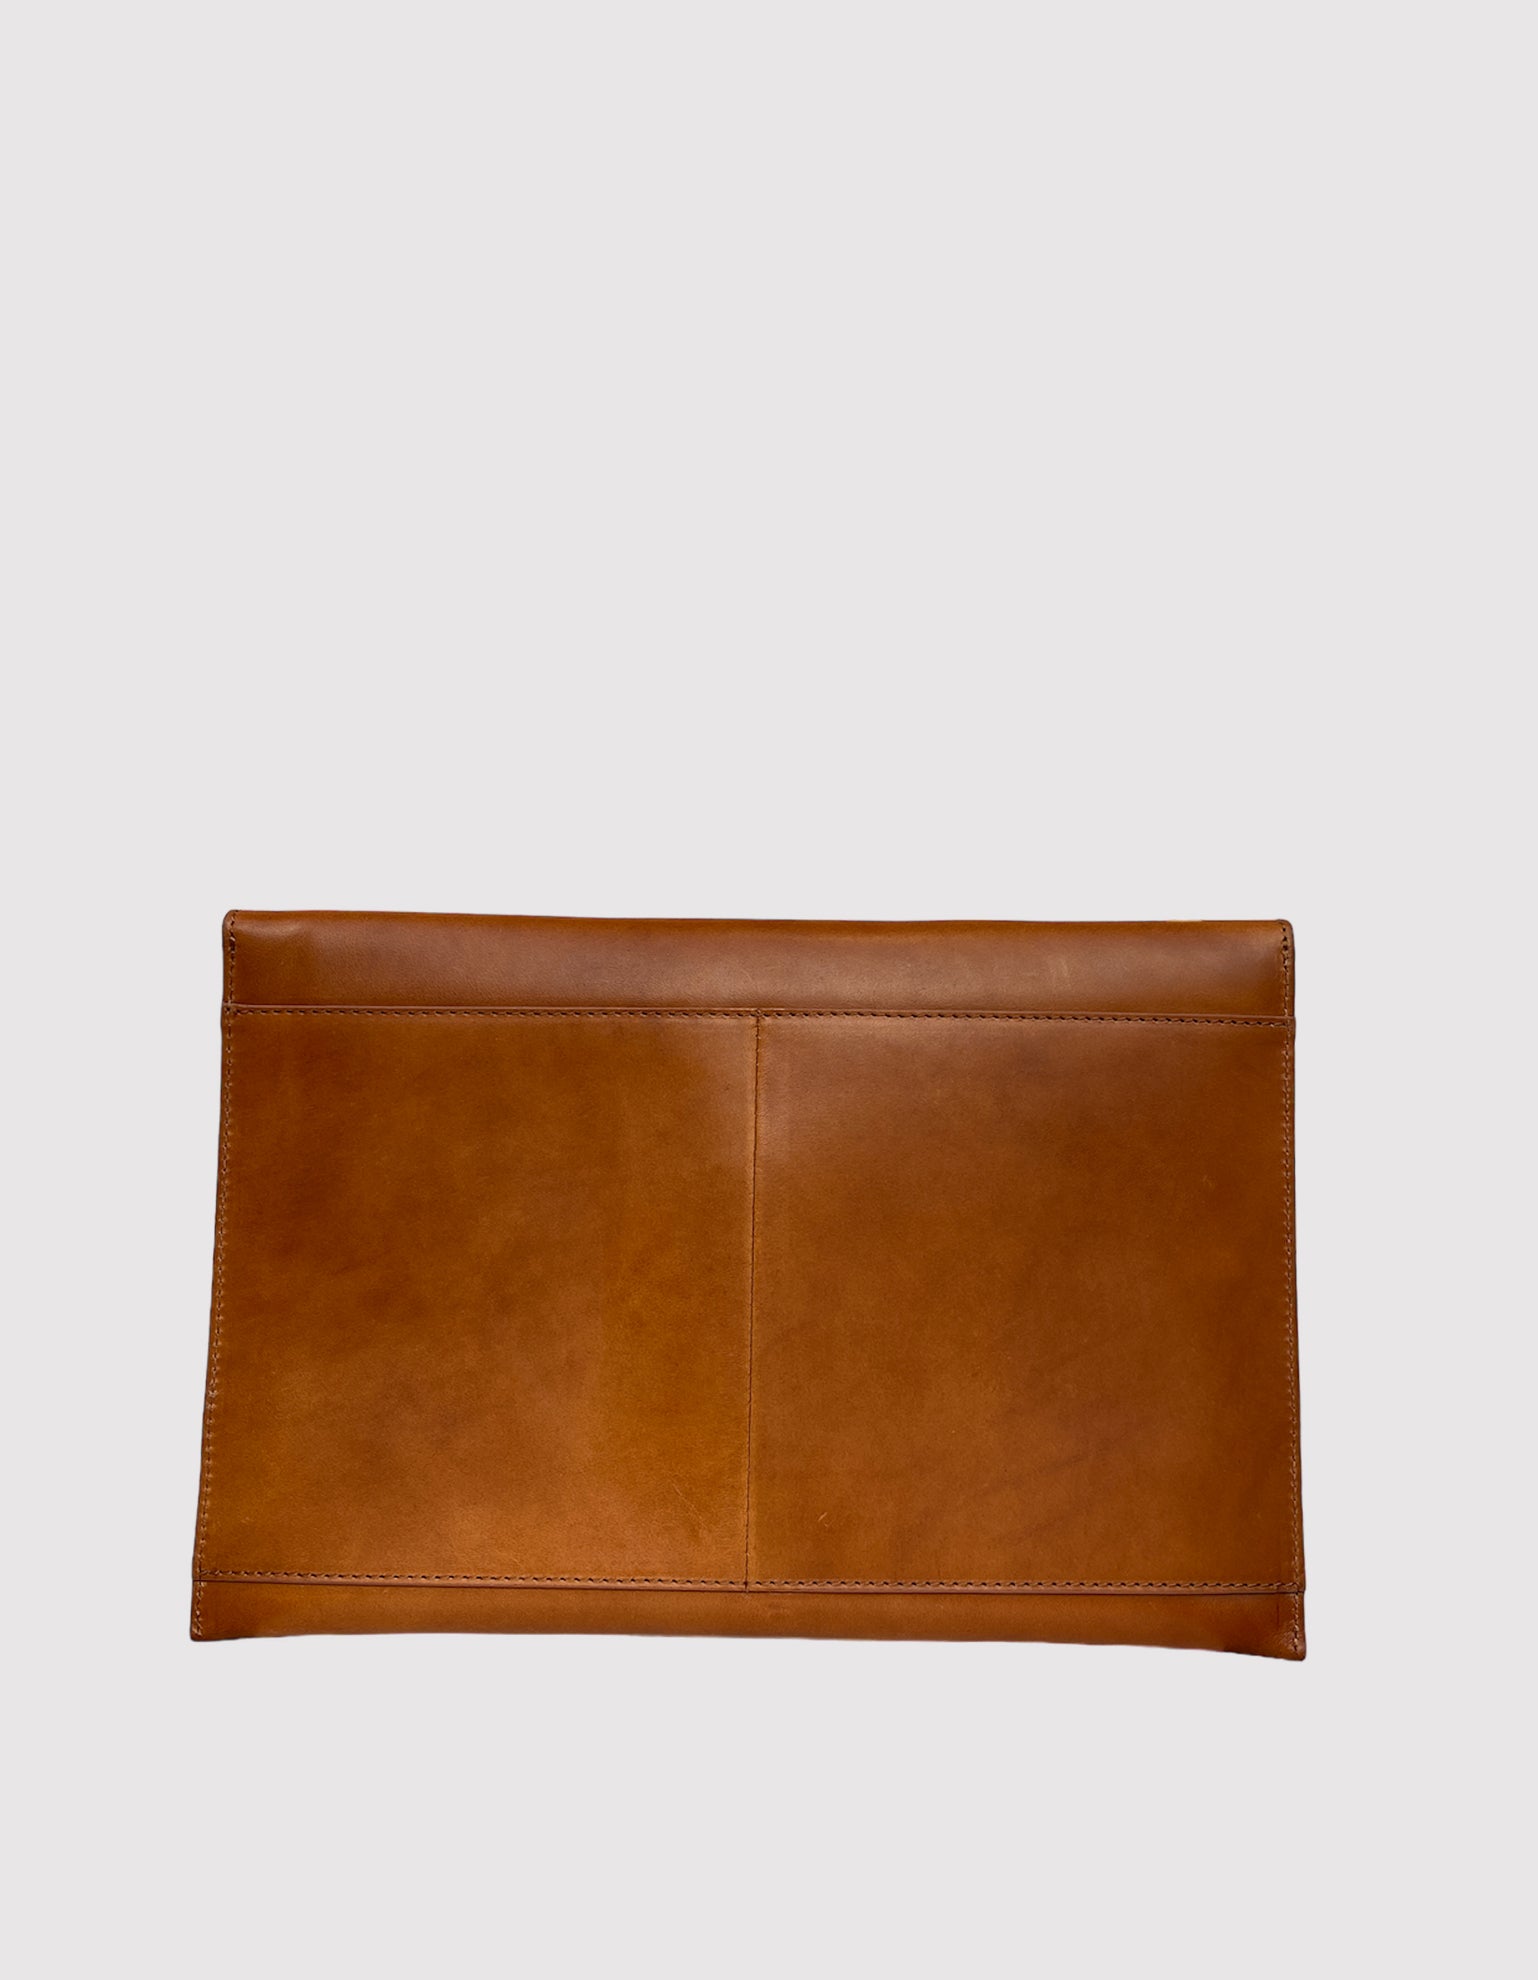 Perfectly Imperfect Envelope Laptop Sleeve 13" - Cognac Classic Leather